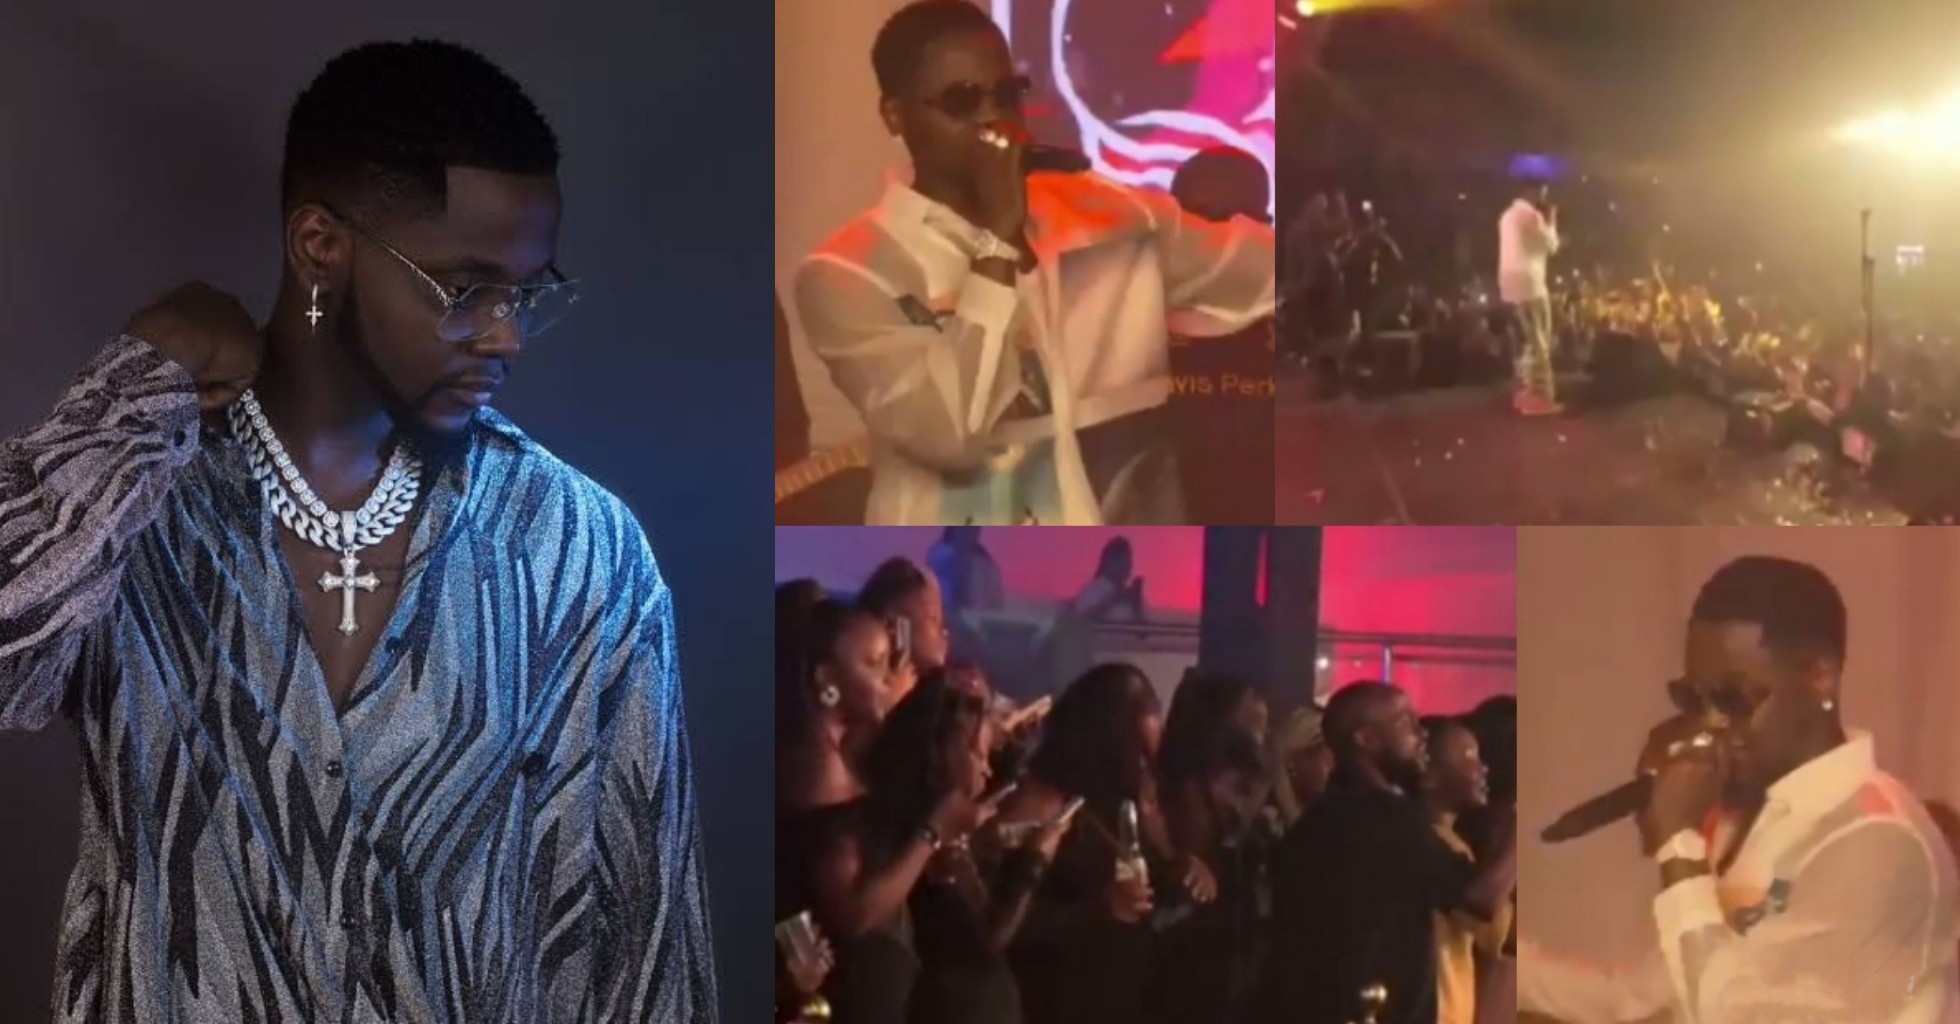 VIDEO: Kizz Daniel thrills Tanzanian fans with electrifying performance, apologizes on stage